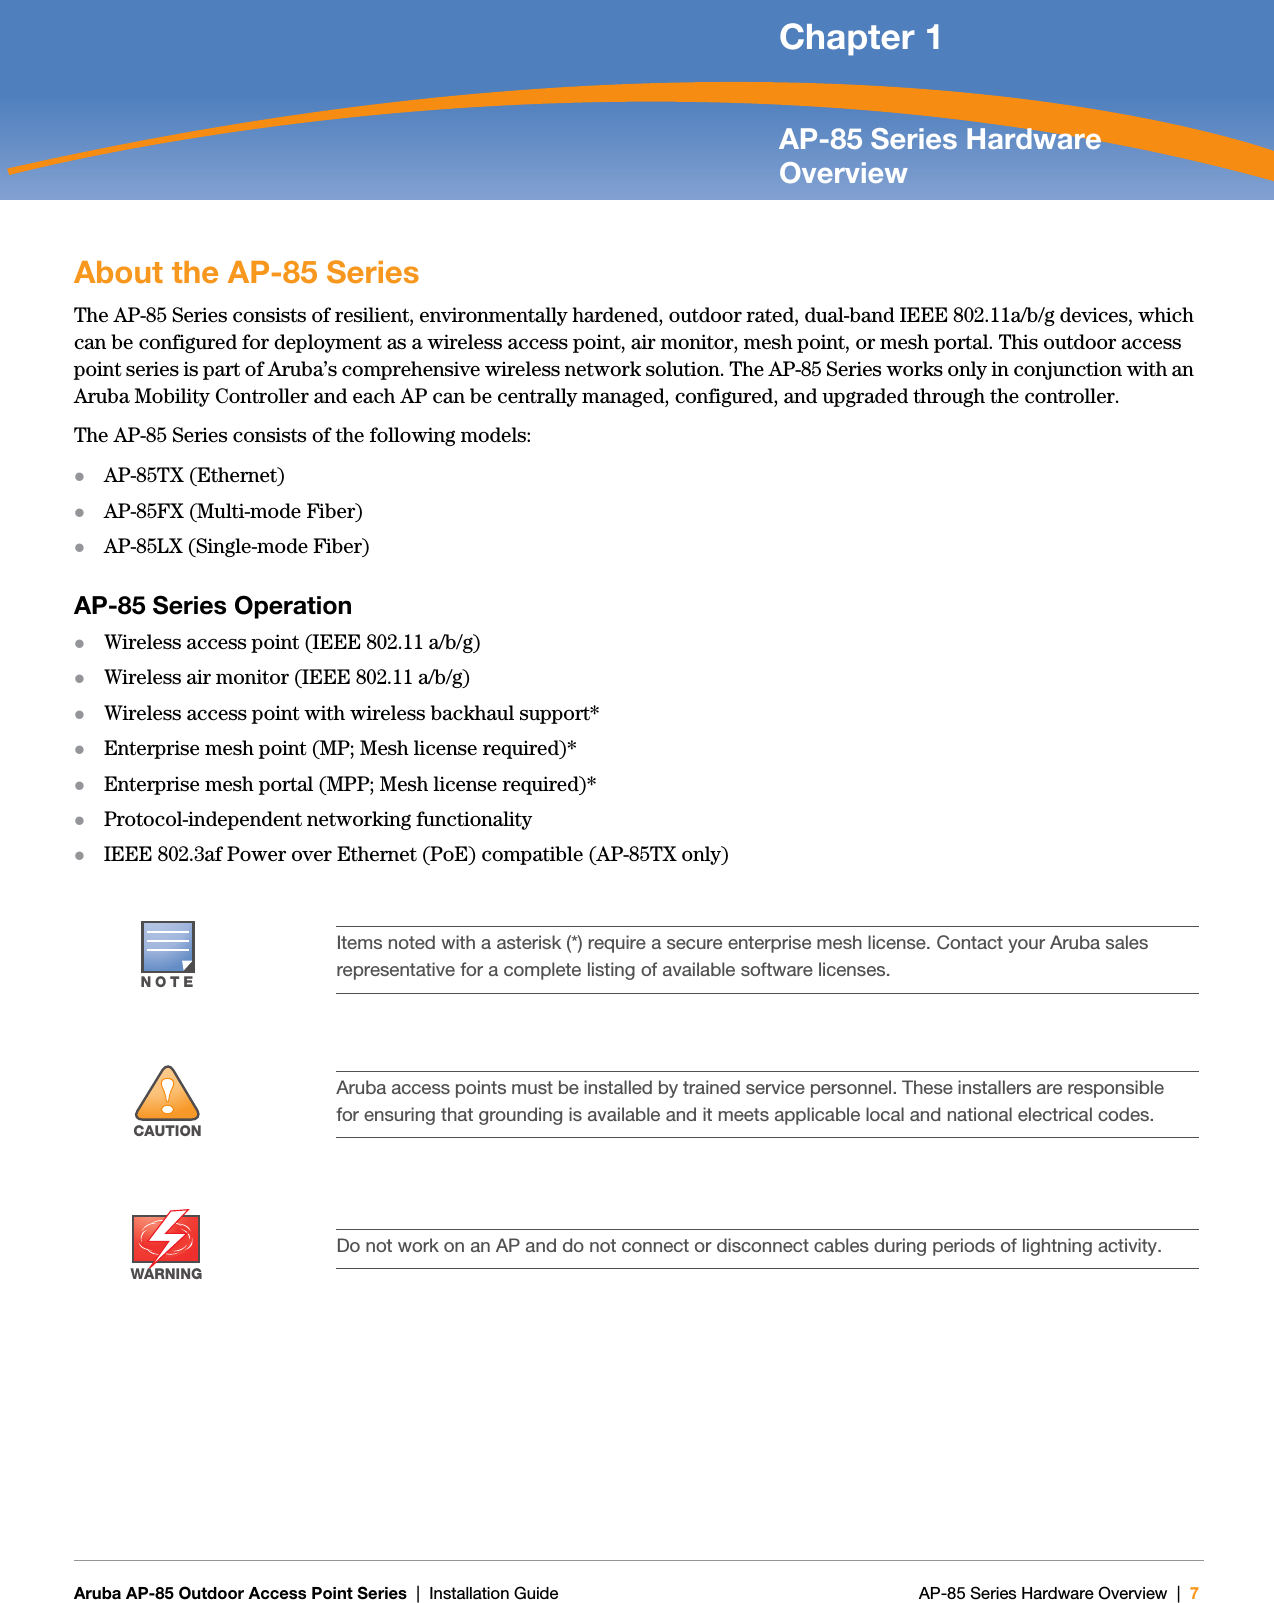   Aruba AP-85 Outdoor Access Point Series | Installation Guide AP-85 Series Hardware Overview | 7 Chapter 1AP-85 Series Hardware OverviewAbout the AP-85 SeriesThe AP-85 Series consists of resilient, environmentally hardened, outdoor rated, dual-band IEEE 802.11a/b/g devices, which can be configured for deployment as a wireless access point, air monitor, mesh point, or mesh portal. This outdoor access point series is part of Aruba’s comprehensive wireless network solution. The AP-85 Series works only in conjunction with an Aruba Mobility Controller and each AP can be centrally managed, configured, and upgraded through the controller.The AP-85 Series consists of the following models:zAP-85TX (Ethernet)zAP-85FX (Multi-mode Fiber)zAP-85LX (Single-mode Fiber)AP-85 Series OperationzWireless access point (IEEE 802.11 a/b/g)zWireless air monitor (IEEE 802.11 a/b/g)zWireless access point with wireless backhaul support*zEnterprise mesh point (MP; Mesh license required)*zEnterprise mesh portal (MPP; Mesh license required)*zProtocol-independent networking functionalityzIEEE 802.3af Power over Ethernet (PoE) compatible (AP-85TX only)NOTEItems noted with a asterisk (*) require a secure enterprise mesh license. Contact your Aruba sales representative for a complete listing of available software licenses.!CAUTIONAruba access points must be installed by trained service personnel. These installers are responsible for ensuring that grounding is available and it meets applicable local and national electrical codes.WARNINGDo not work on an AP and do not connect or disconnect cables during periods of lightning activity.